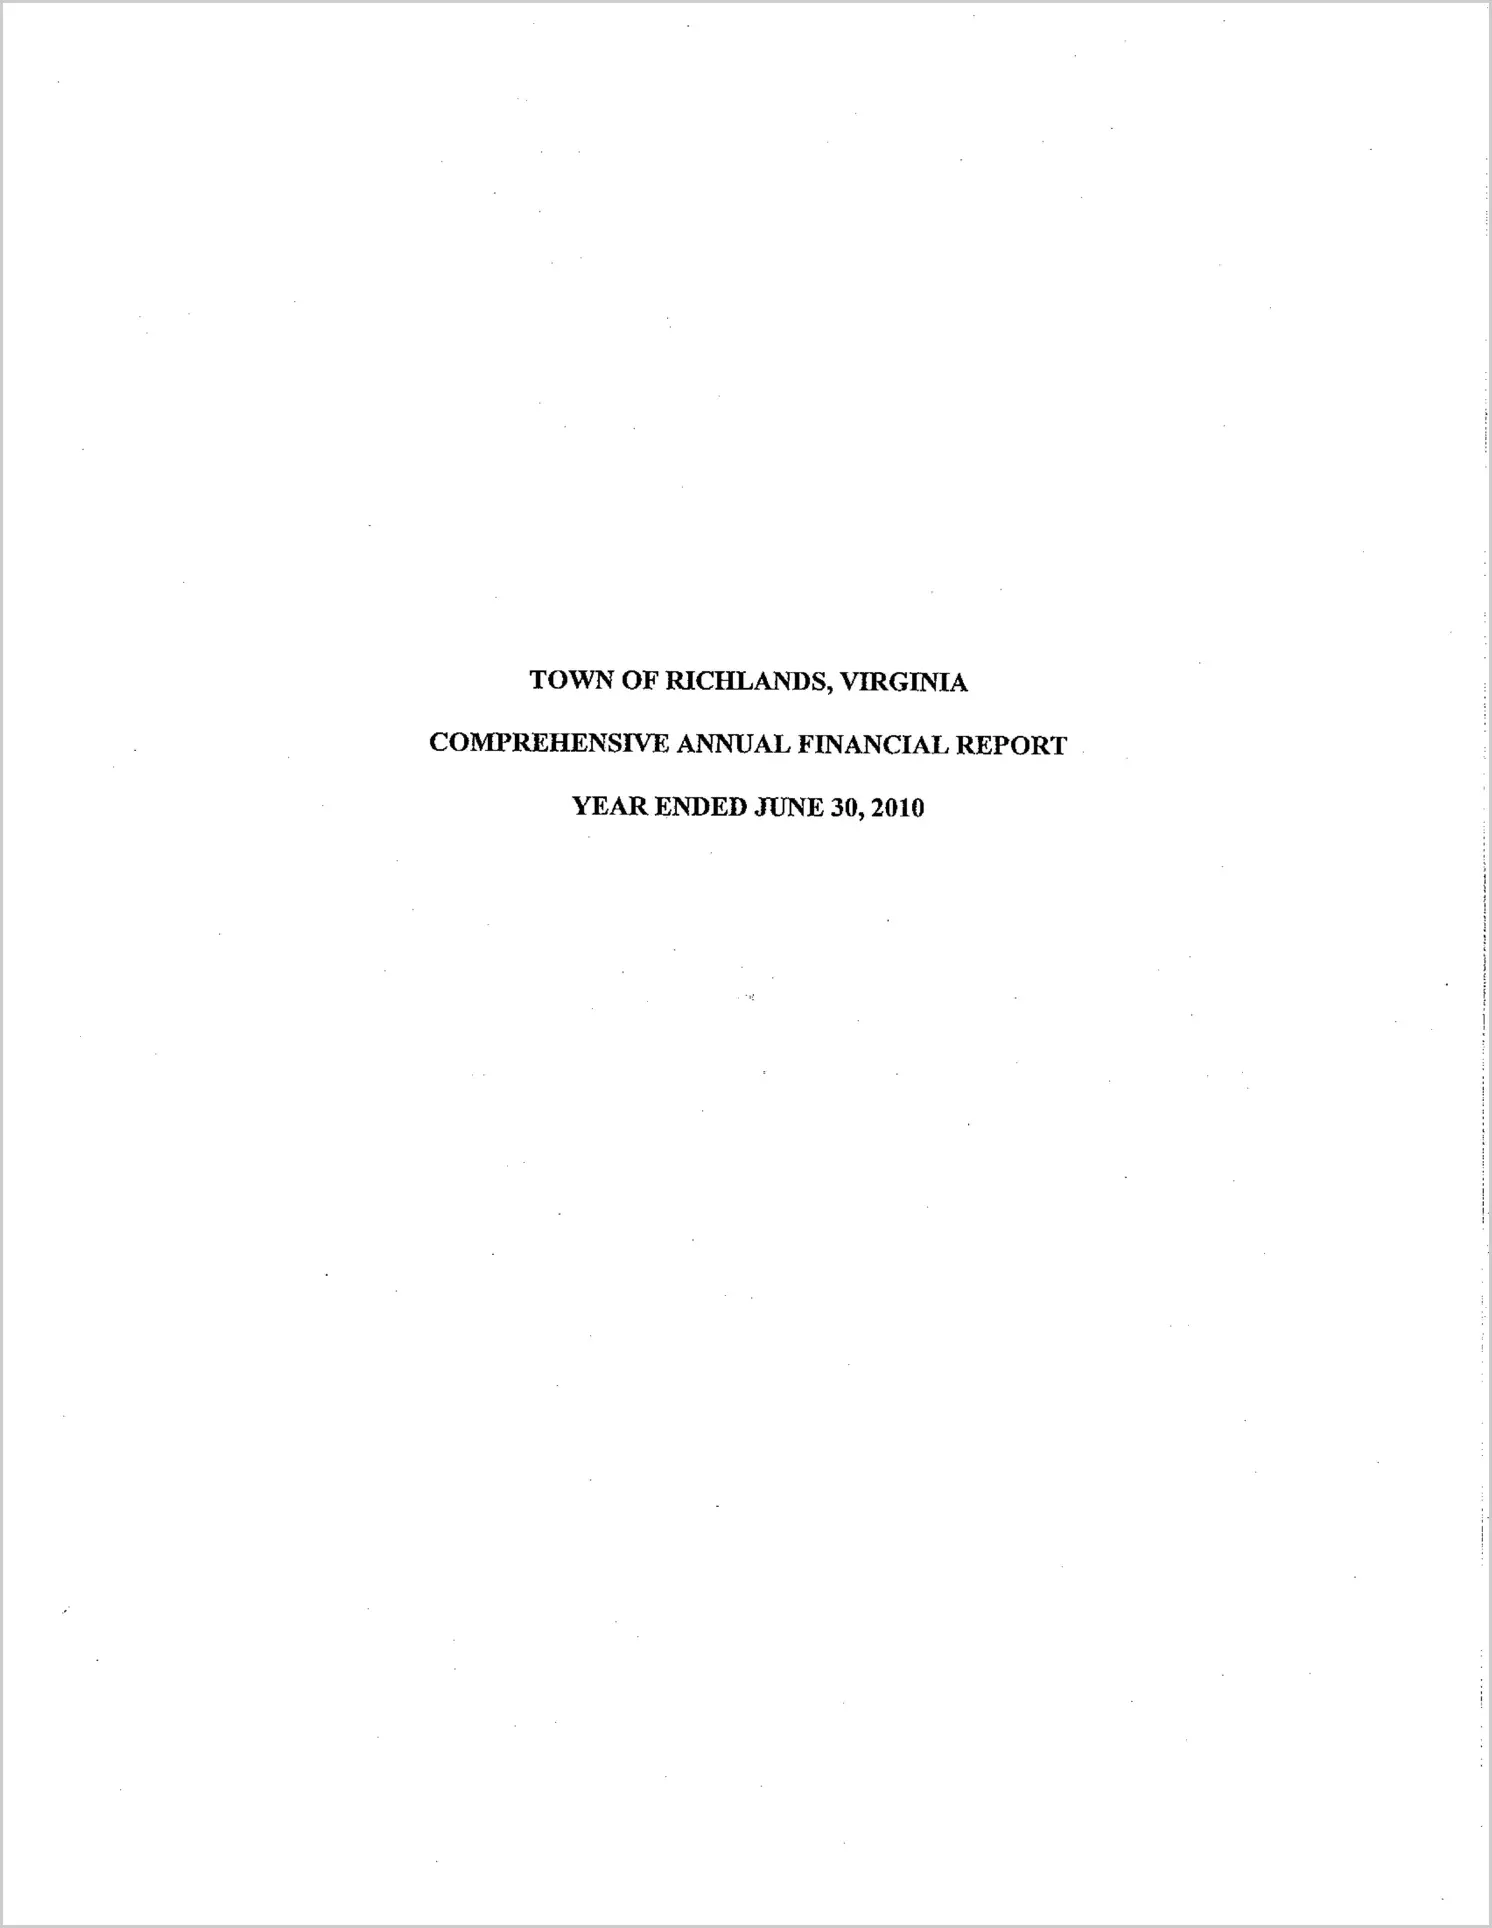 2010 Annual Financial Report for Town of Richlands